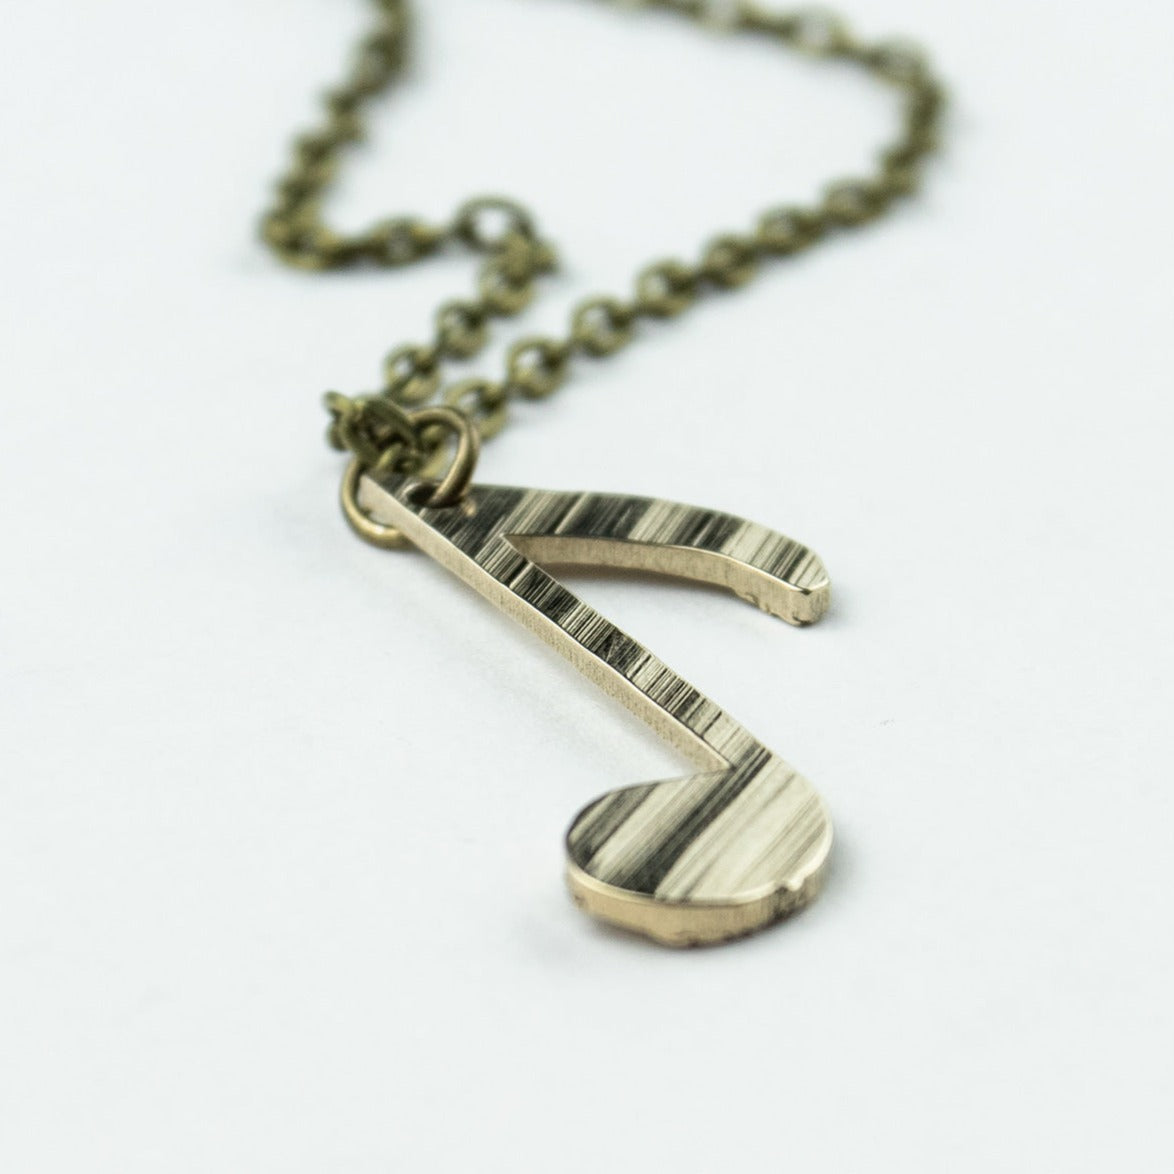 Off Beat - Reclaimed Cymbal Necklace